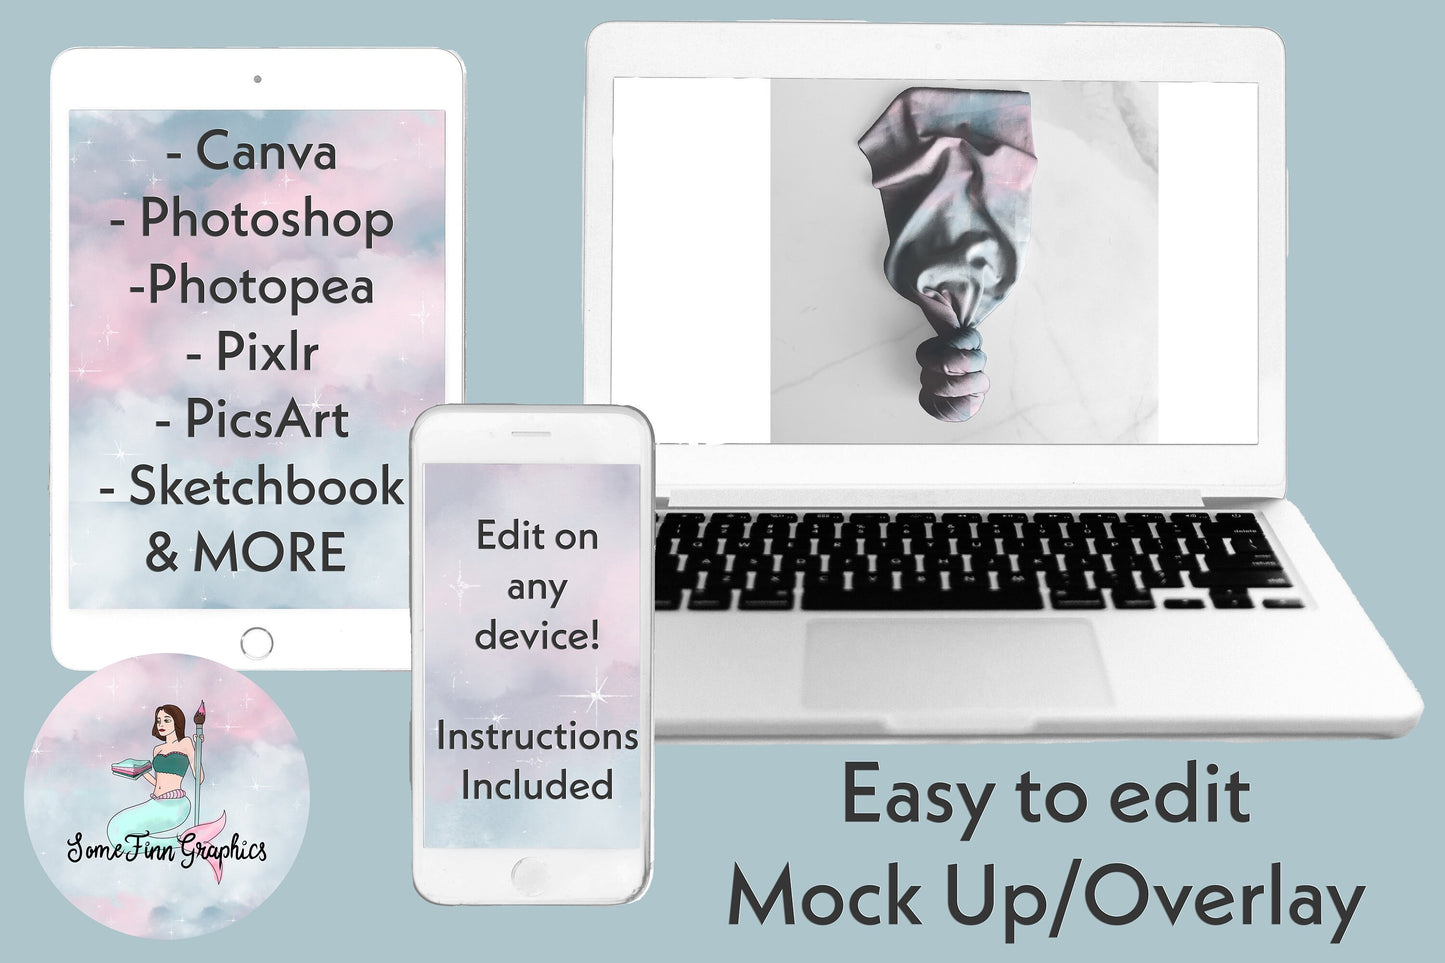 Realistic Top Knot Headwrap Mock Up